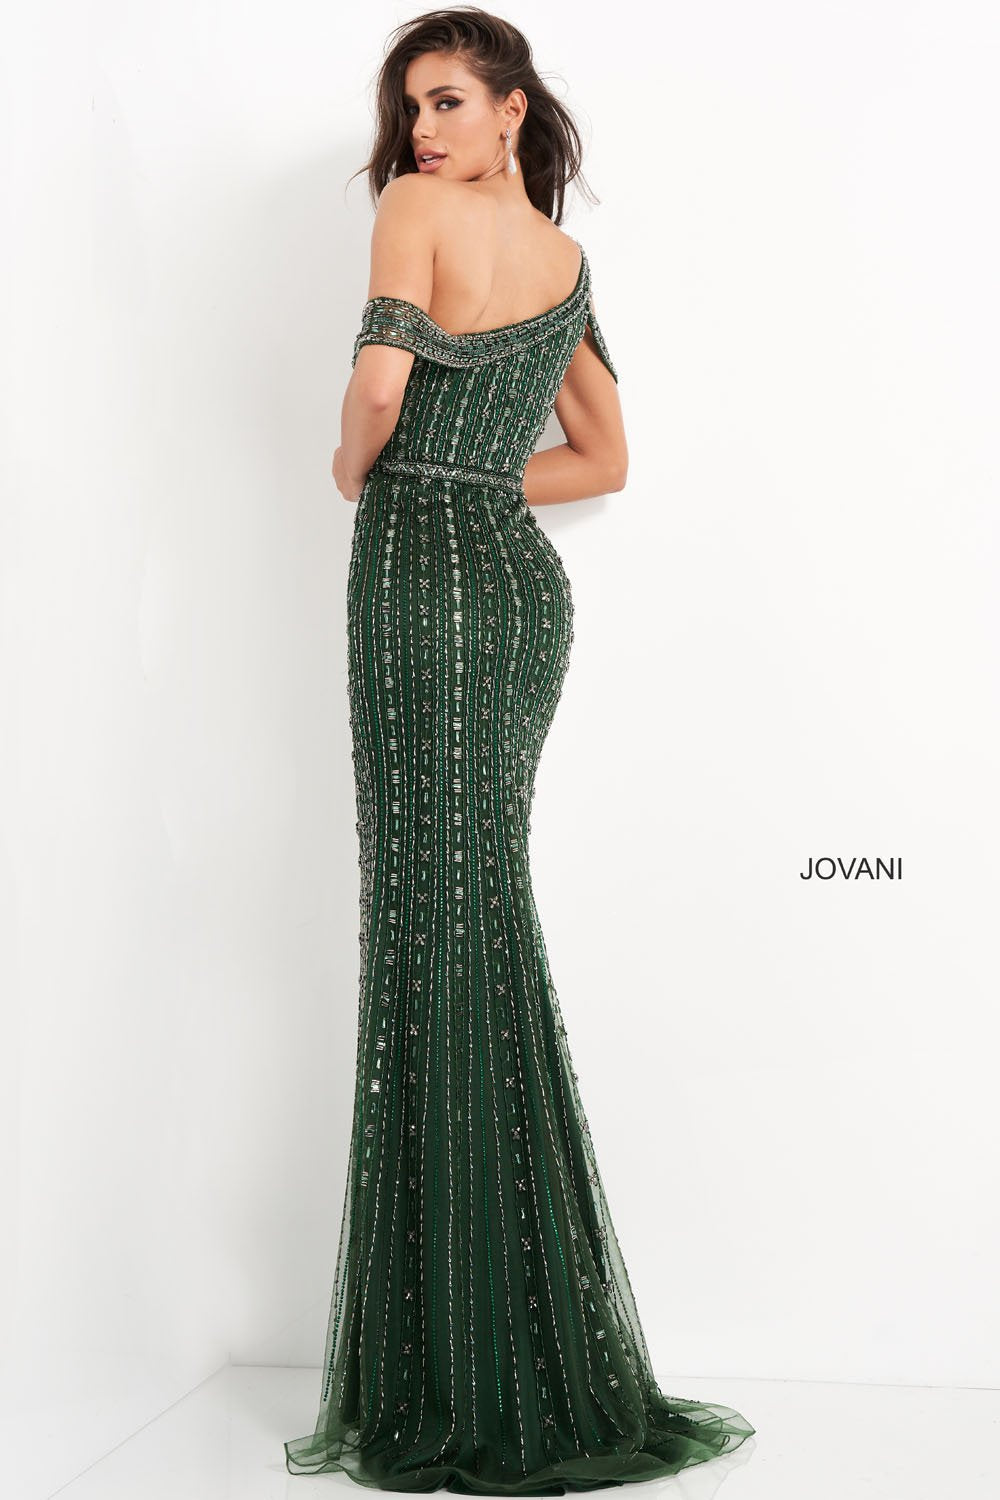 Jovani 03124 dress images in these colors: Emerald.